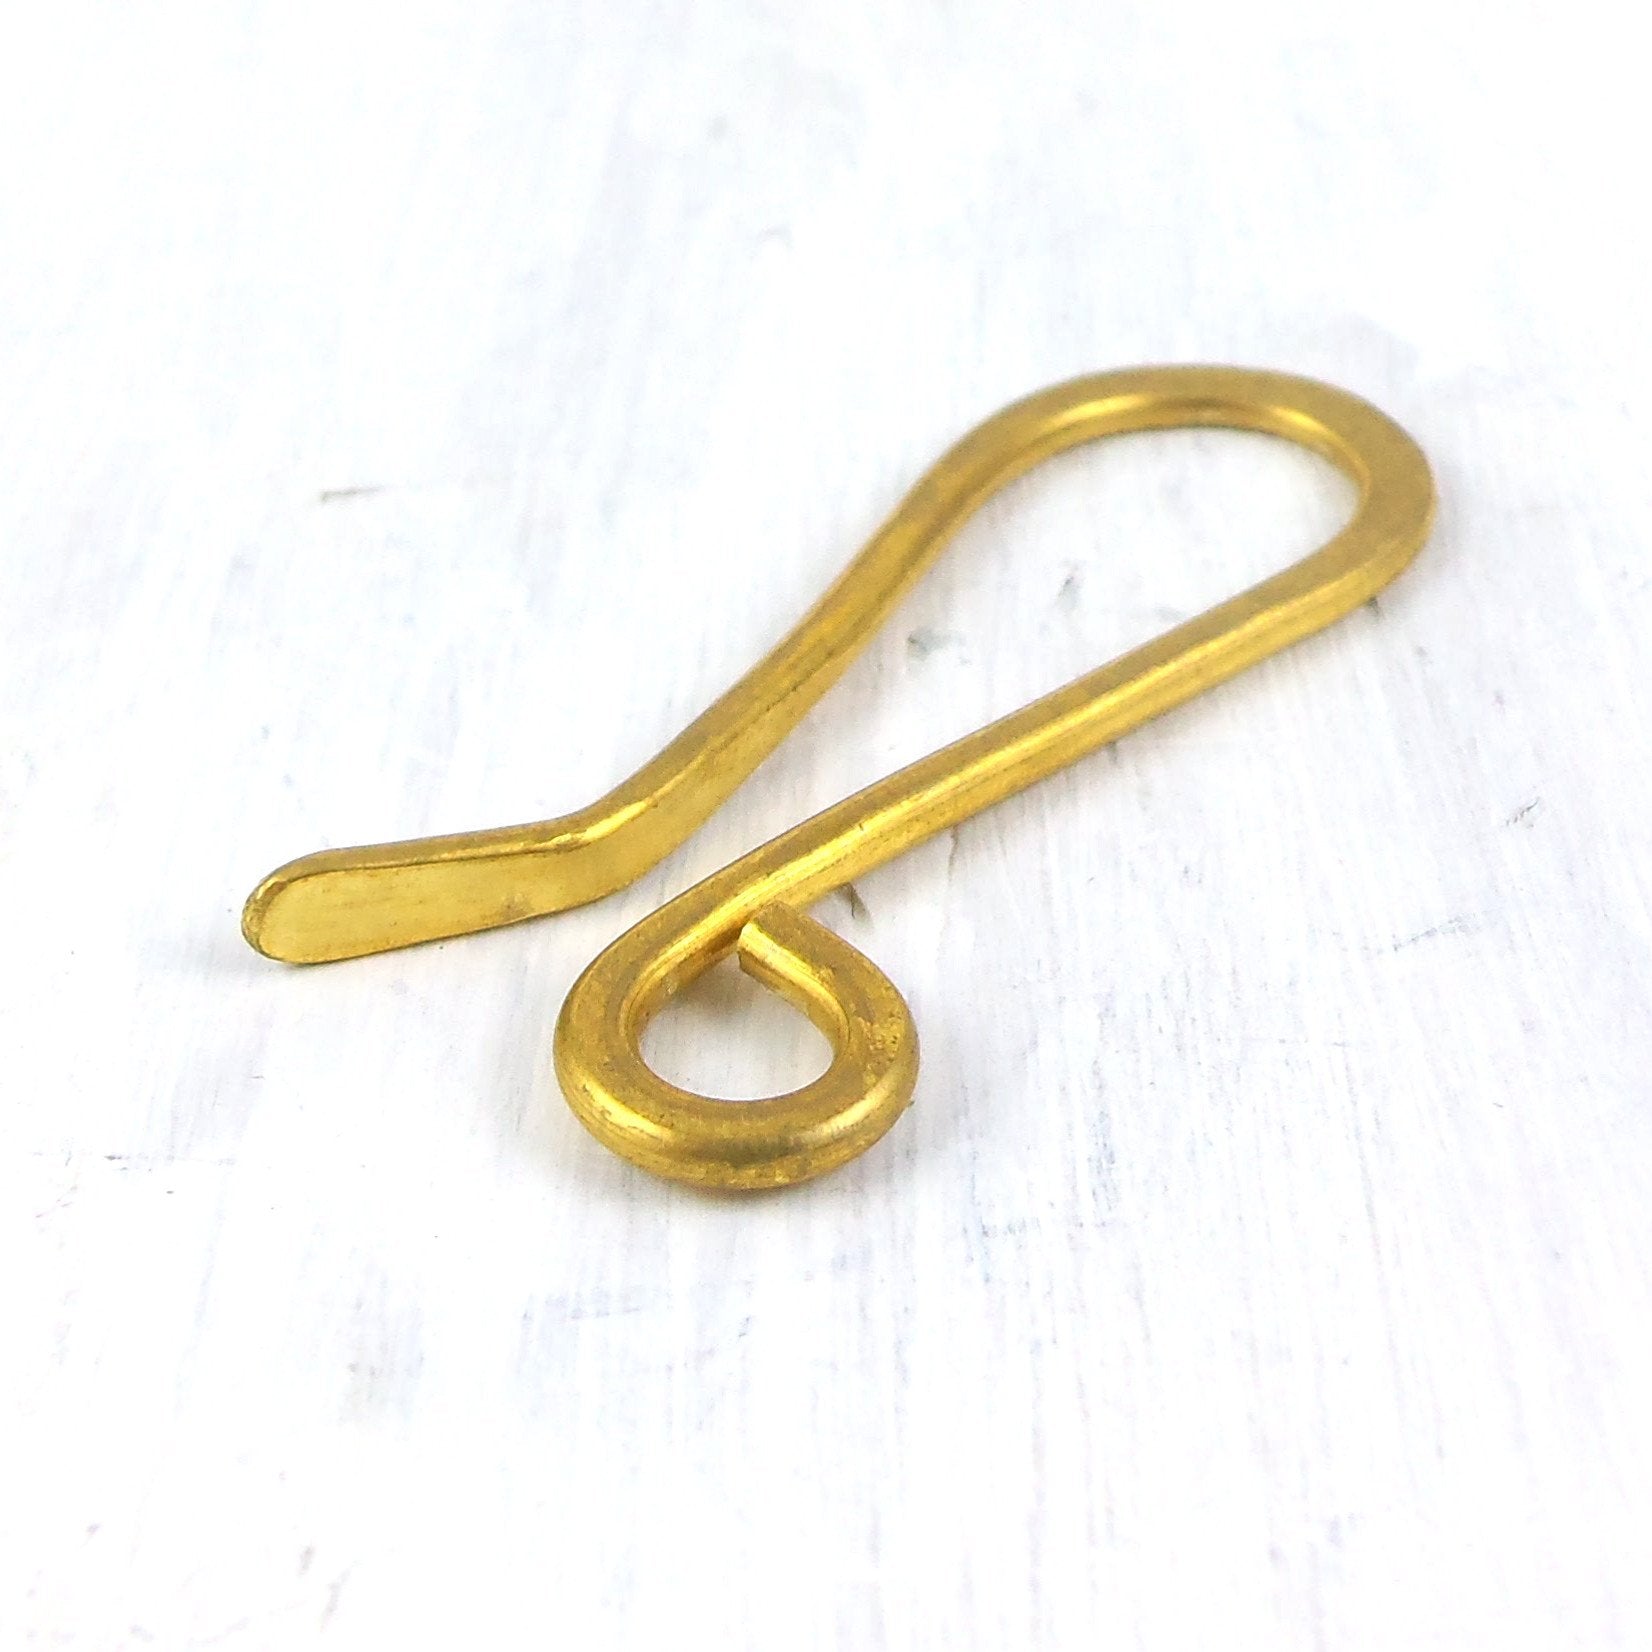 | elongated hook | a simple hook for your key chain | hand forged brass | #failjewelry